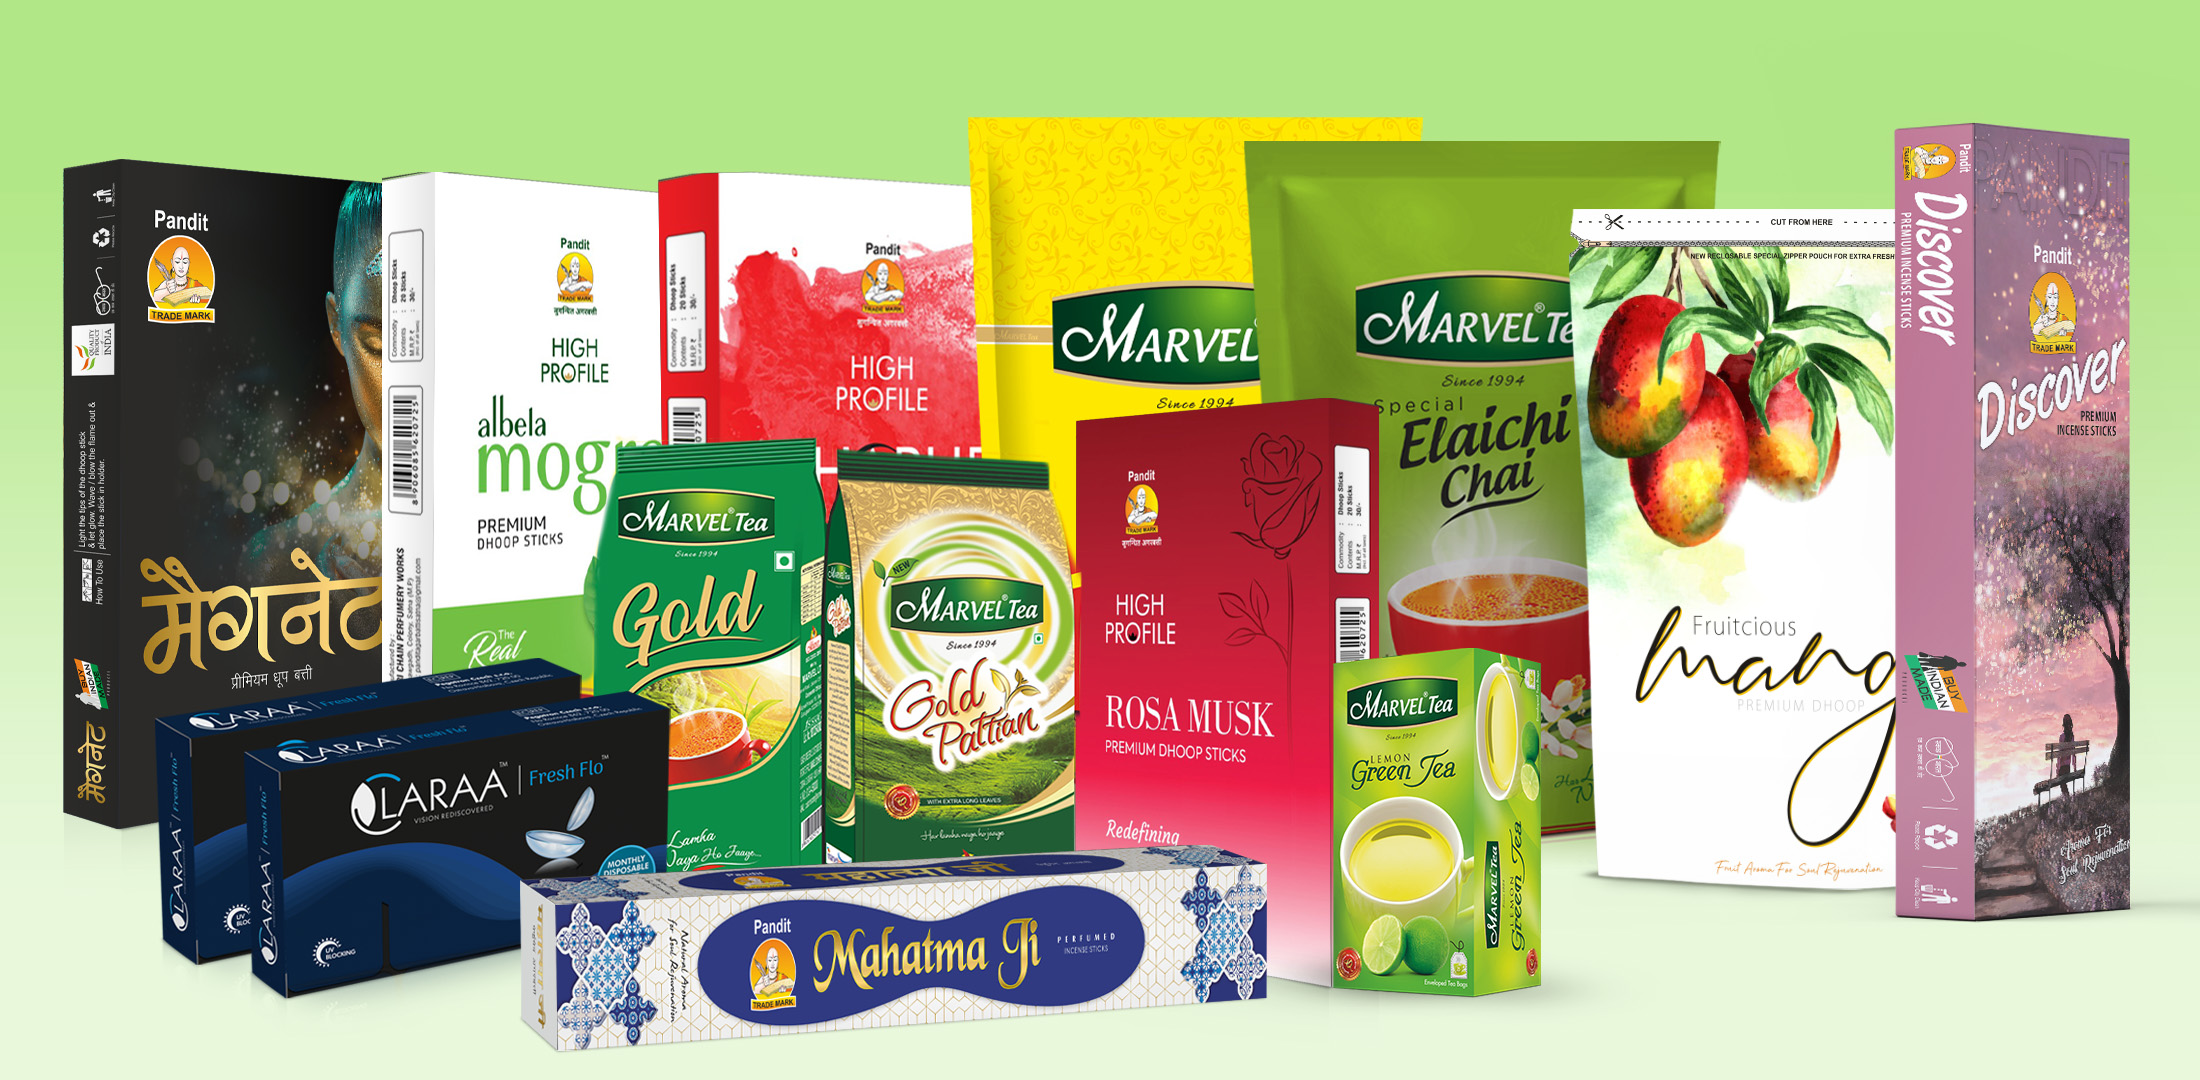 Product Packaging Design Companies in Delhi